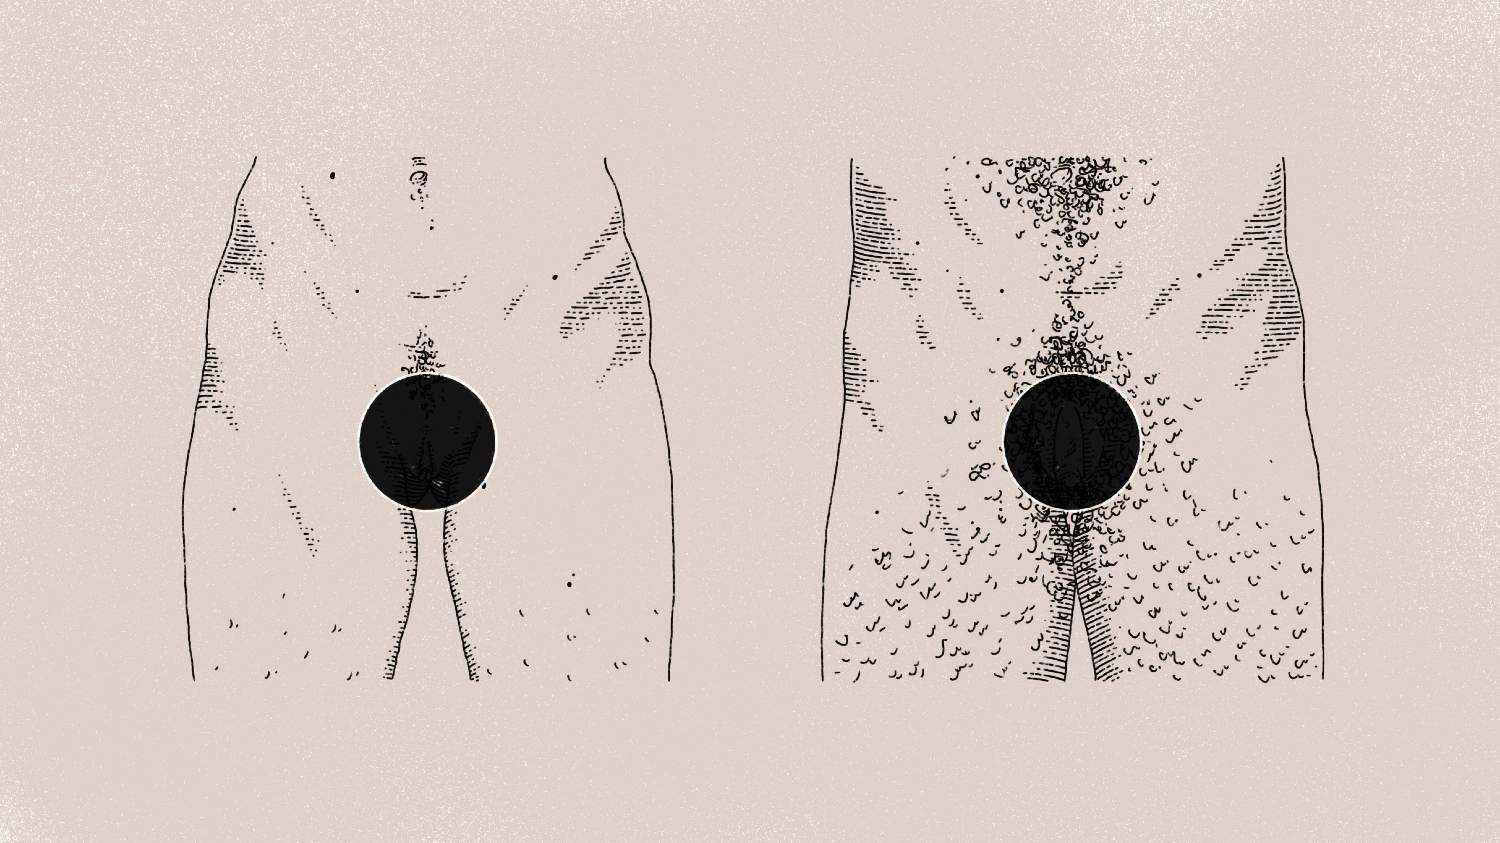 Two lower torsos next to each other with a black censor circles over their genitalia.